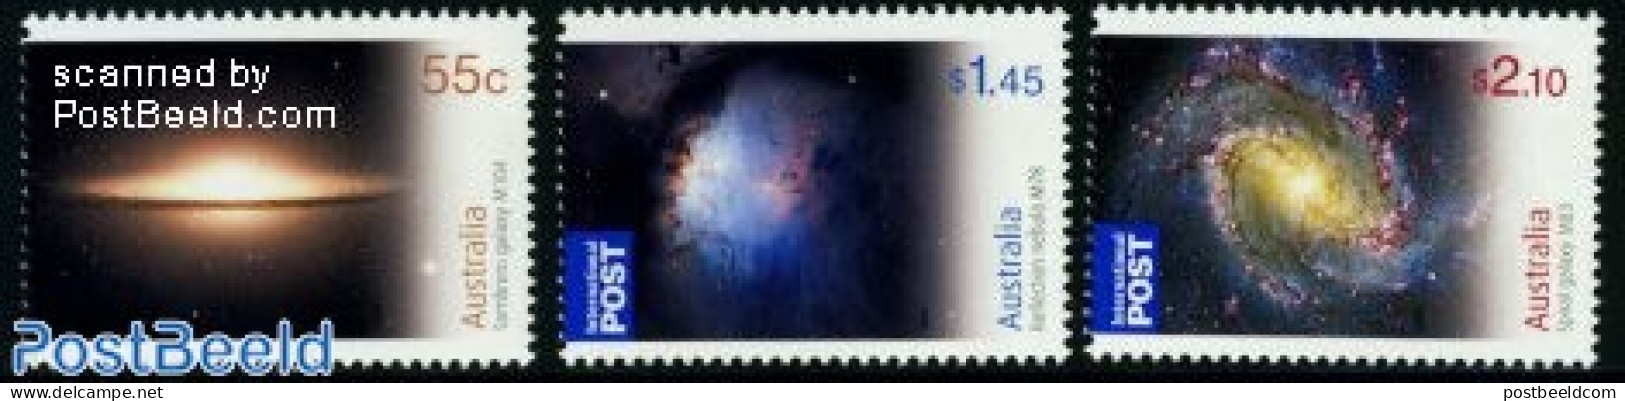 Australia 2009 Astronomy 3v, Mint NH, Science - Astronomy - Unused Stamps